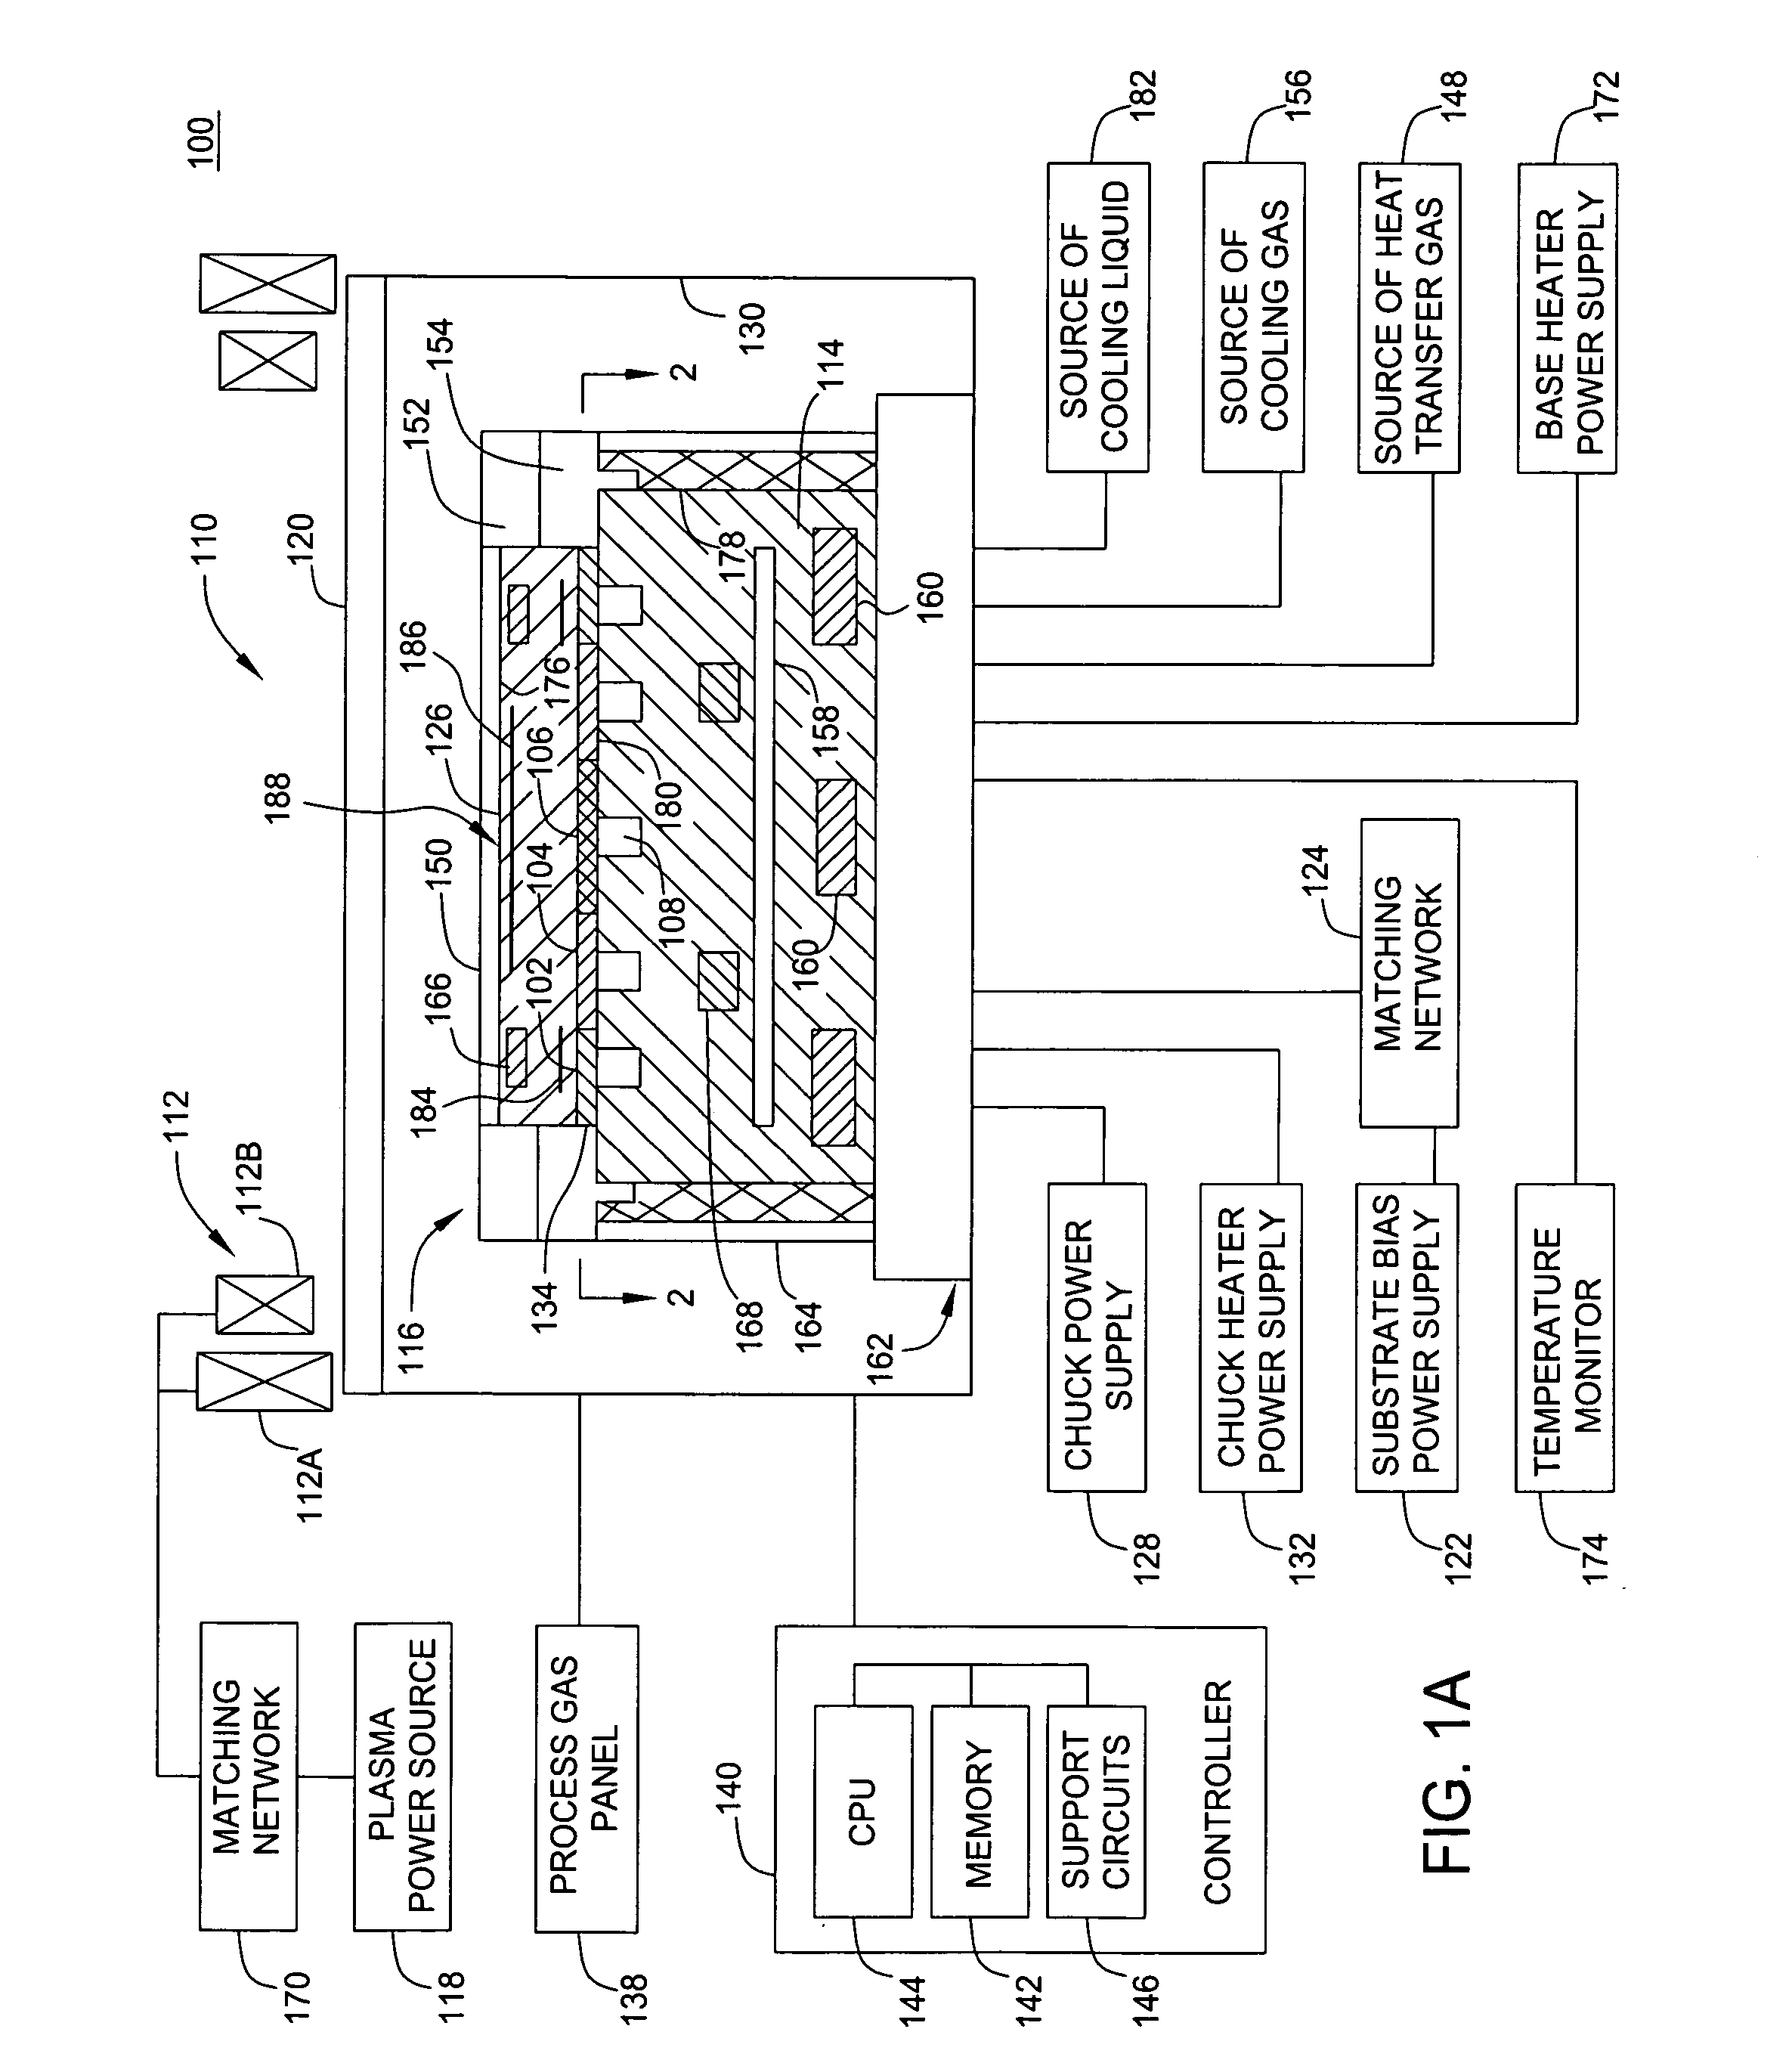 Method and apparatus for controlling temperature of a substrate